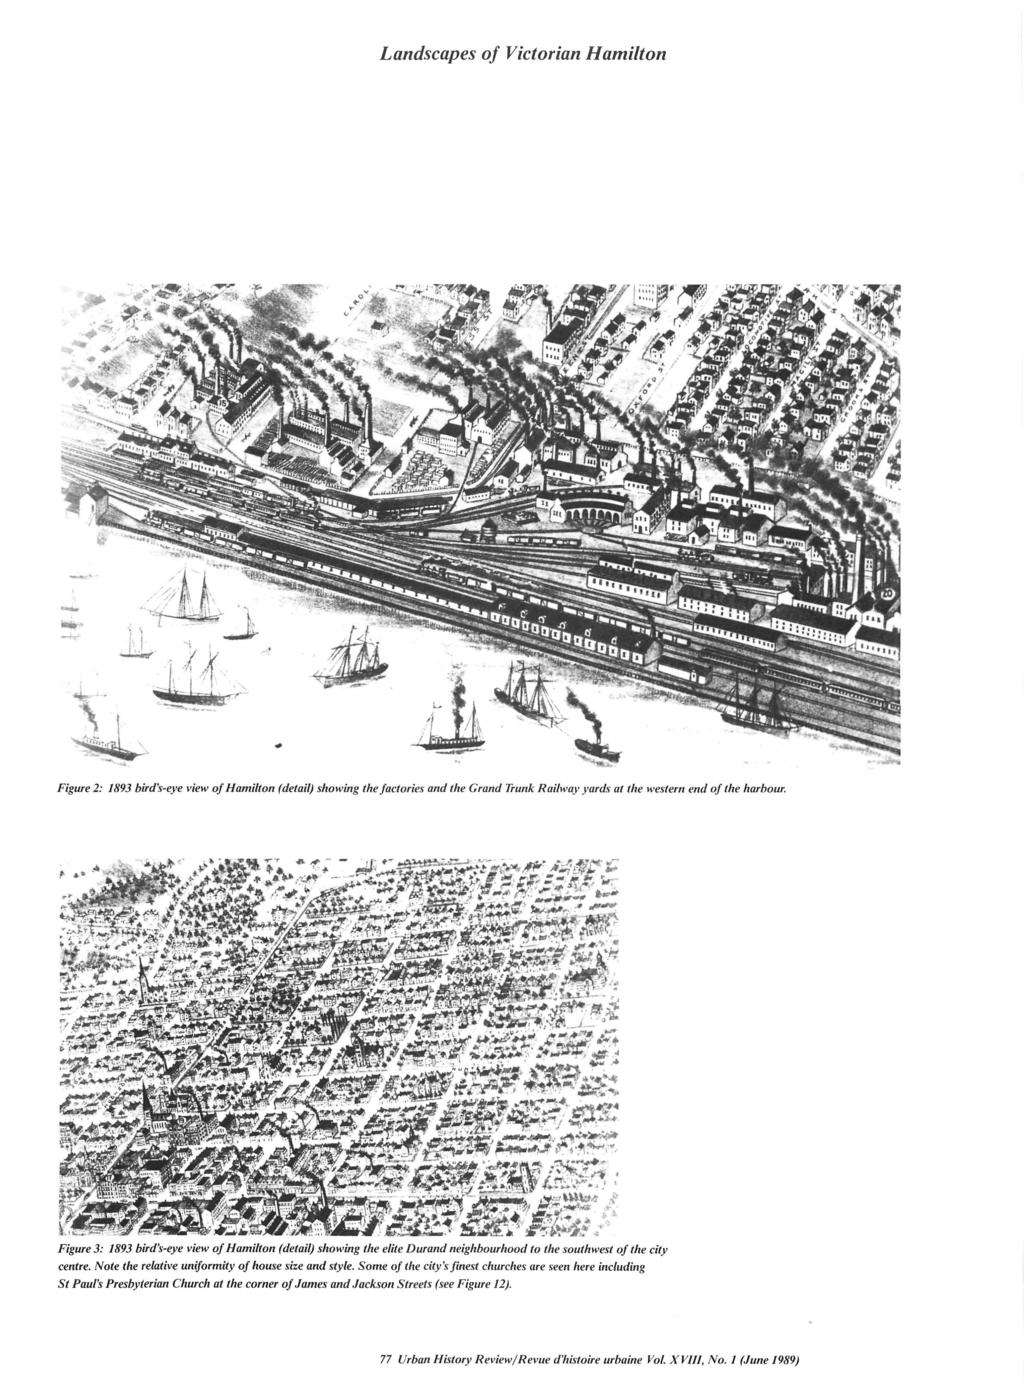 Landscapes of Victorian Hamilton Figure 2: 193 bird's-eye view of Hamilton (detail) showing the factories and the Grand Trunk Railway yards at the western end of the harbour..."»*?"* *..!<" *>>>+.